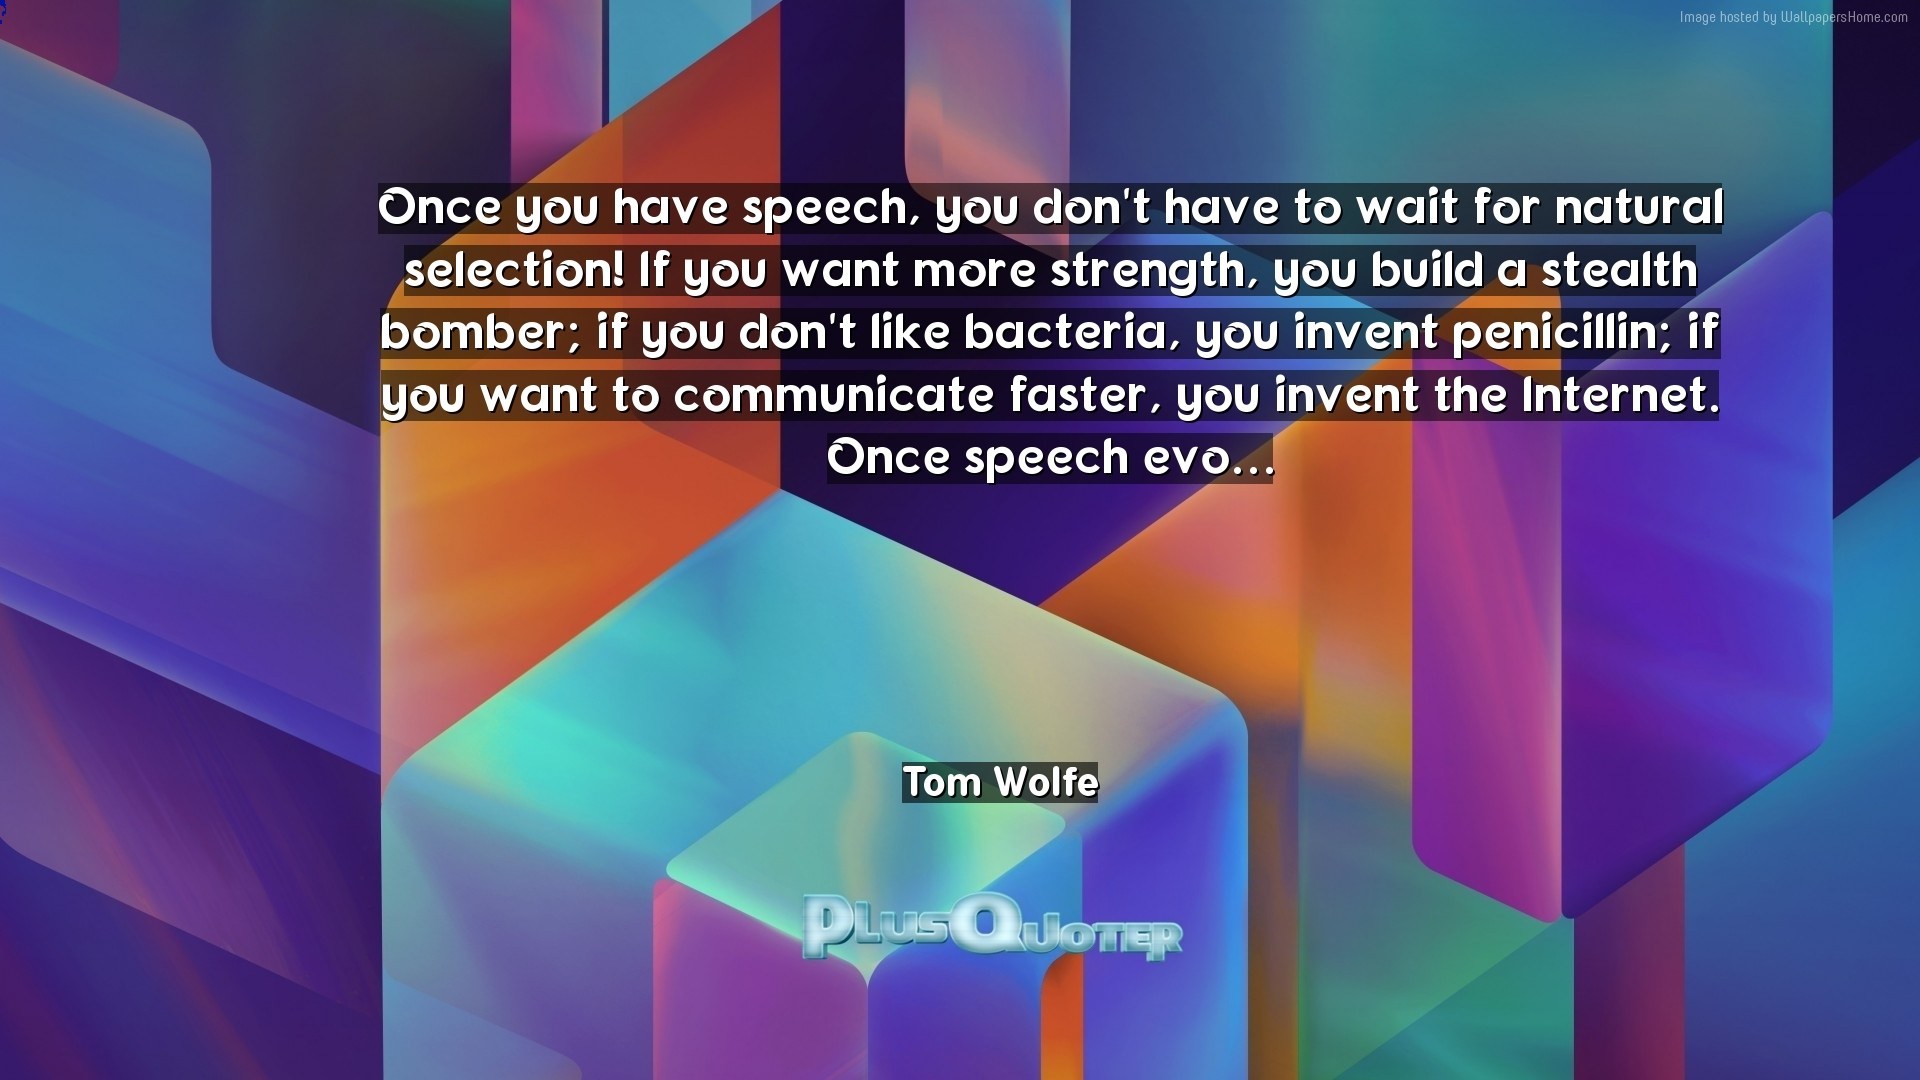 1920x1080 Download Wallpaper with inspirational Quotes- "Once you have speech, you don